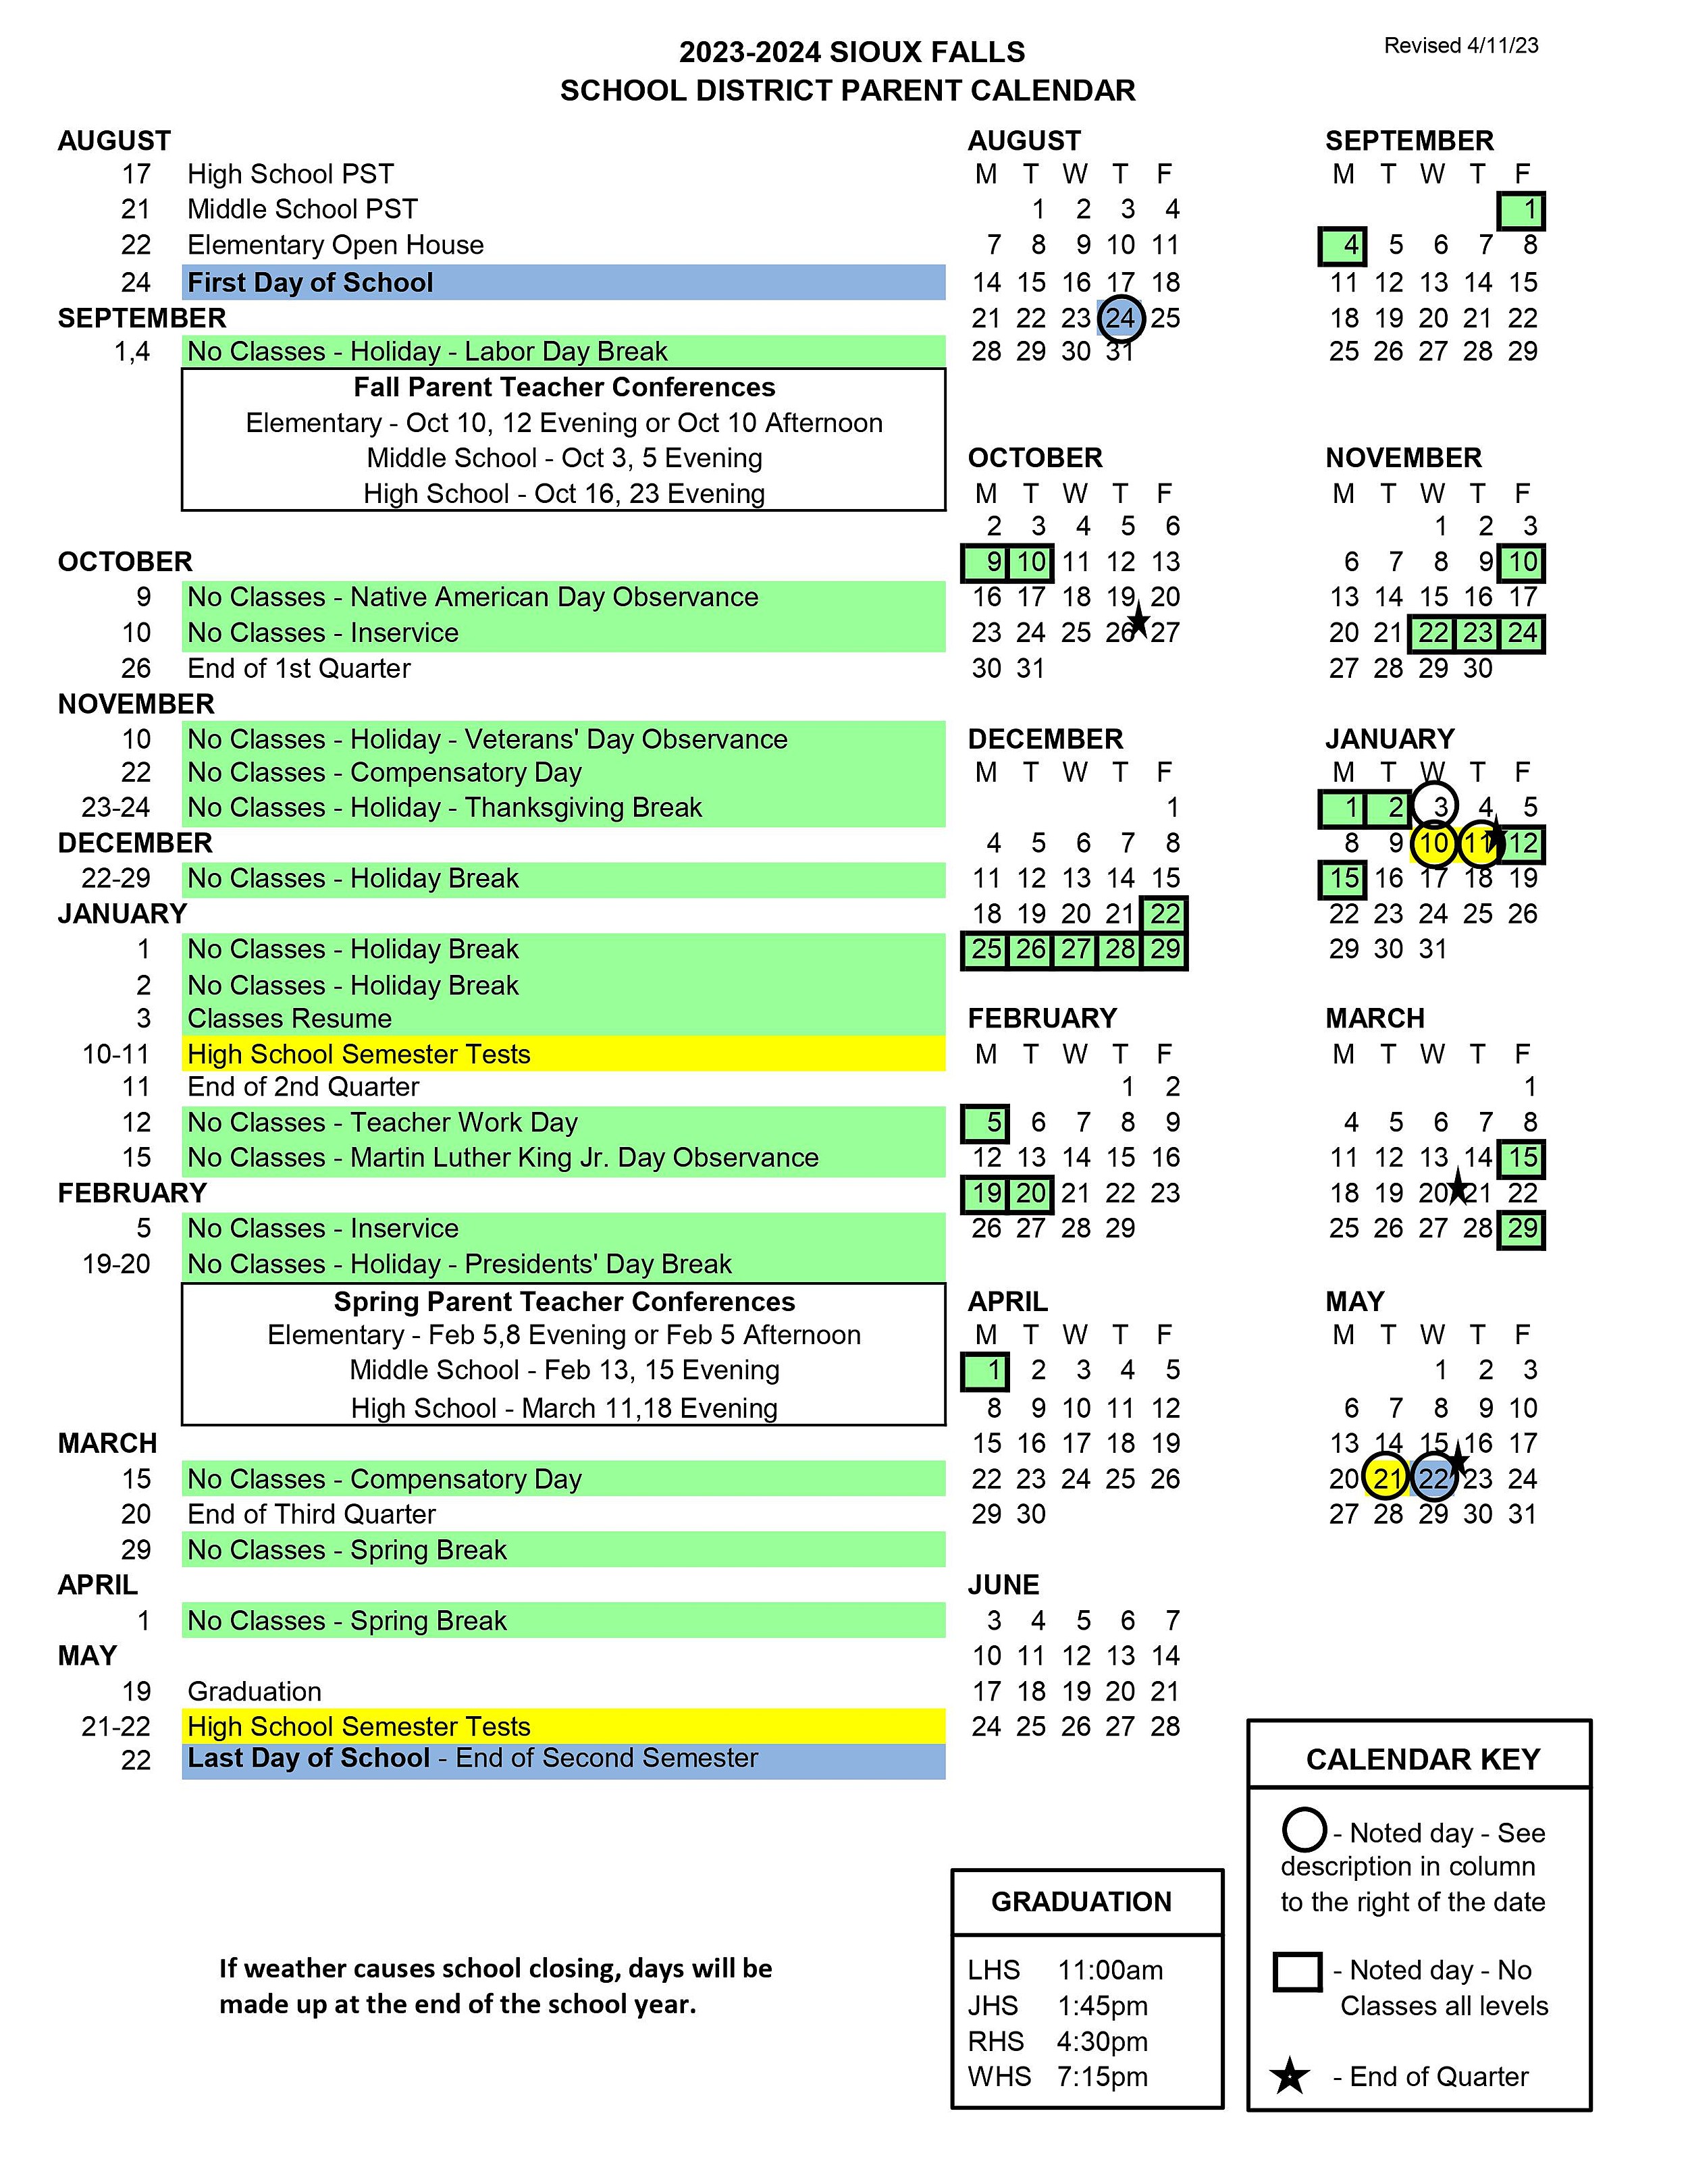 Here is the Sioux Falls School District Calendar 2023 2024